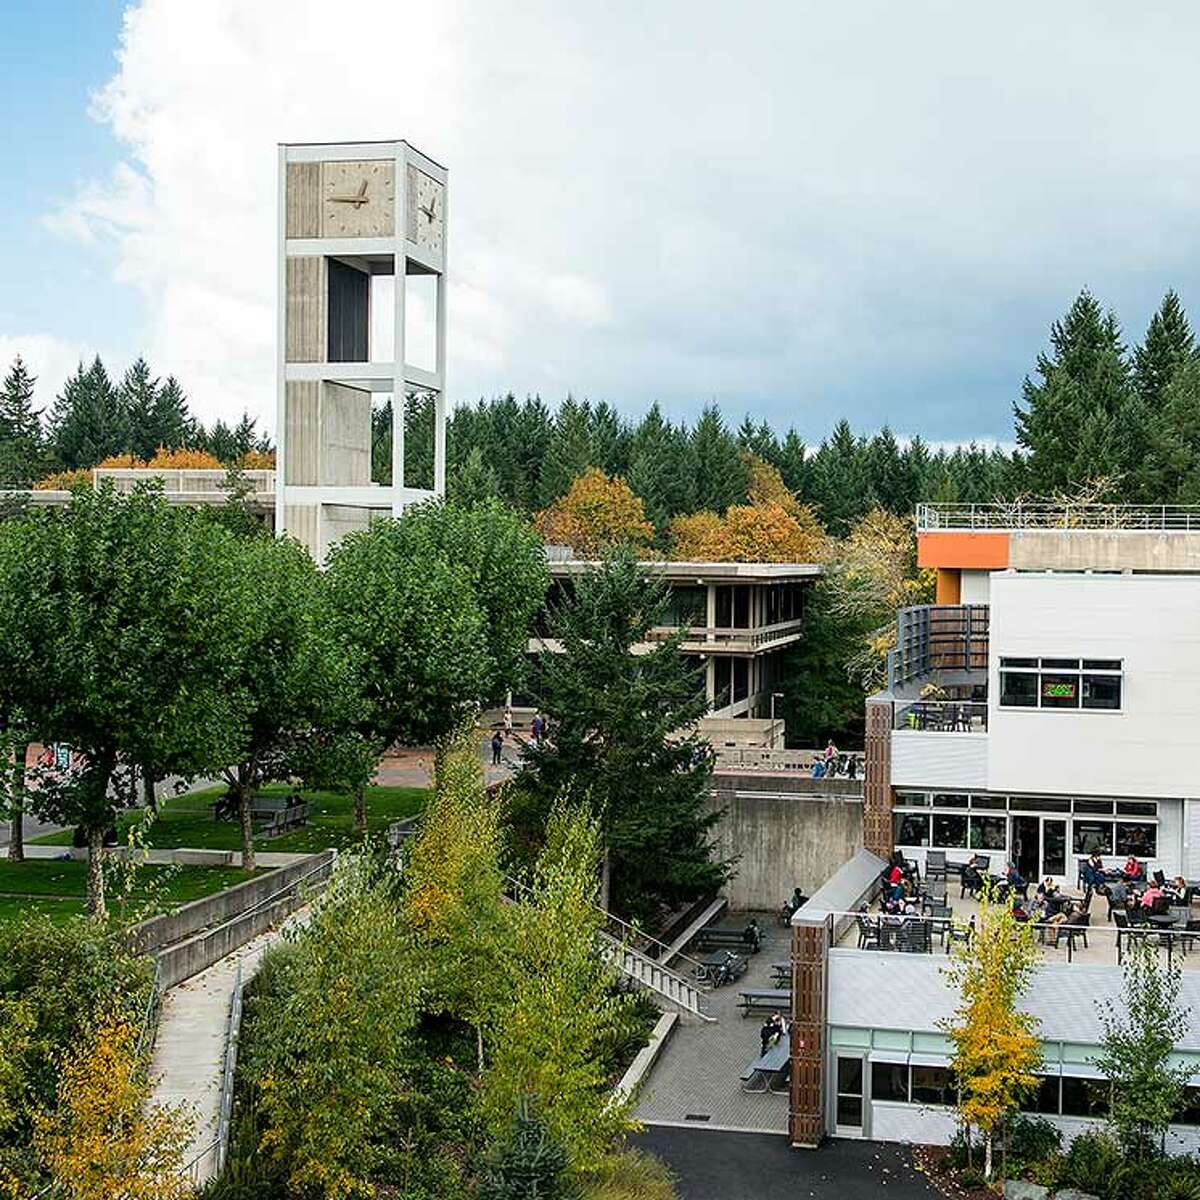 The Evergreen State College campus in Olympia.